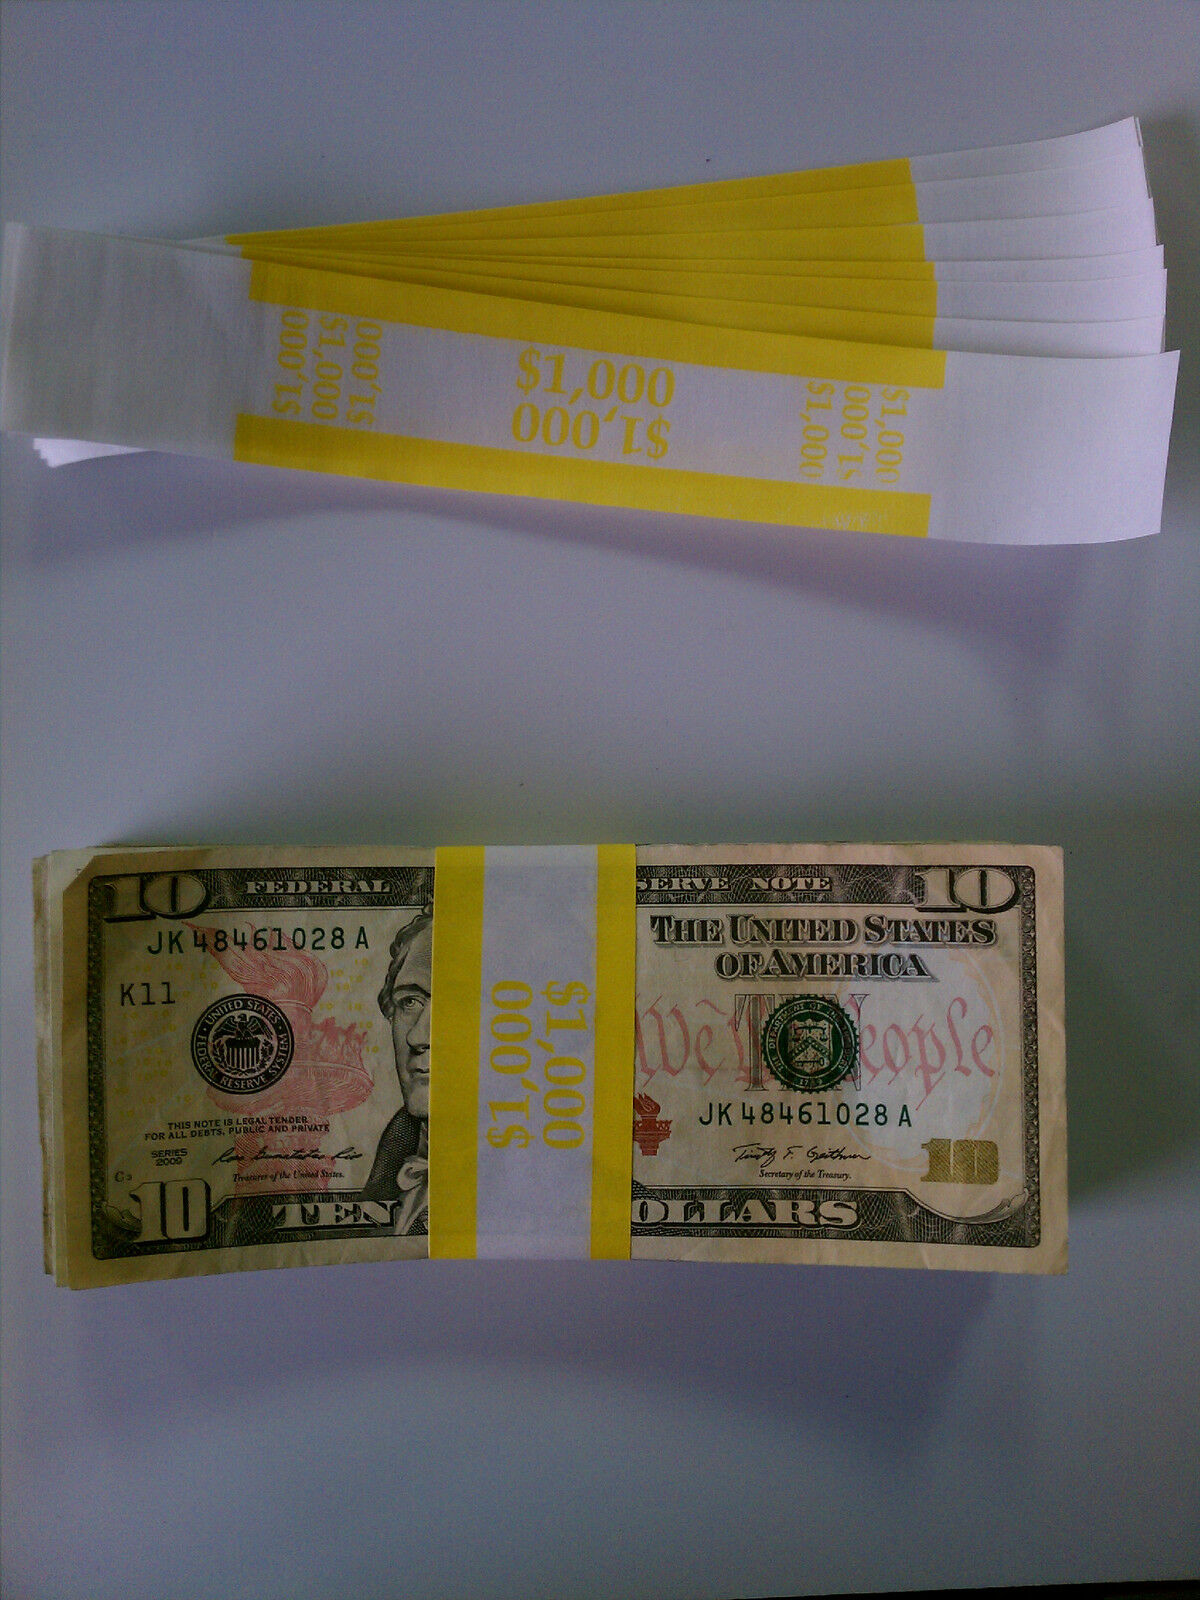 100 - New Self-sealing Currency Bands - $1000 Denomination - Straps Money Tens